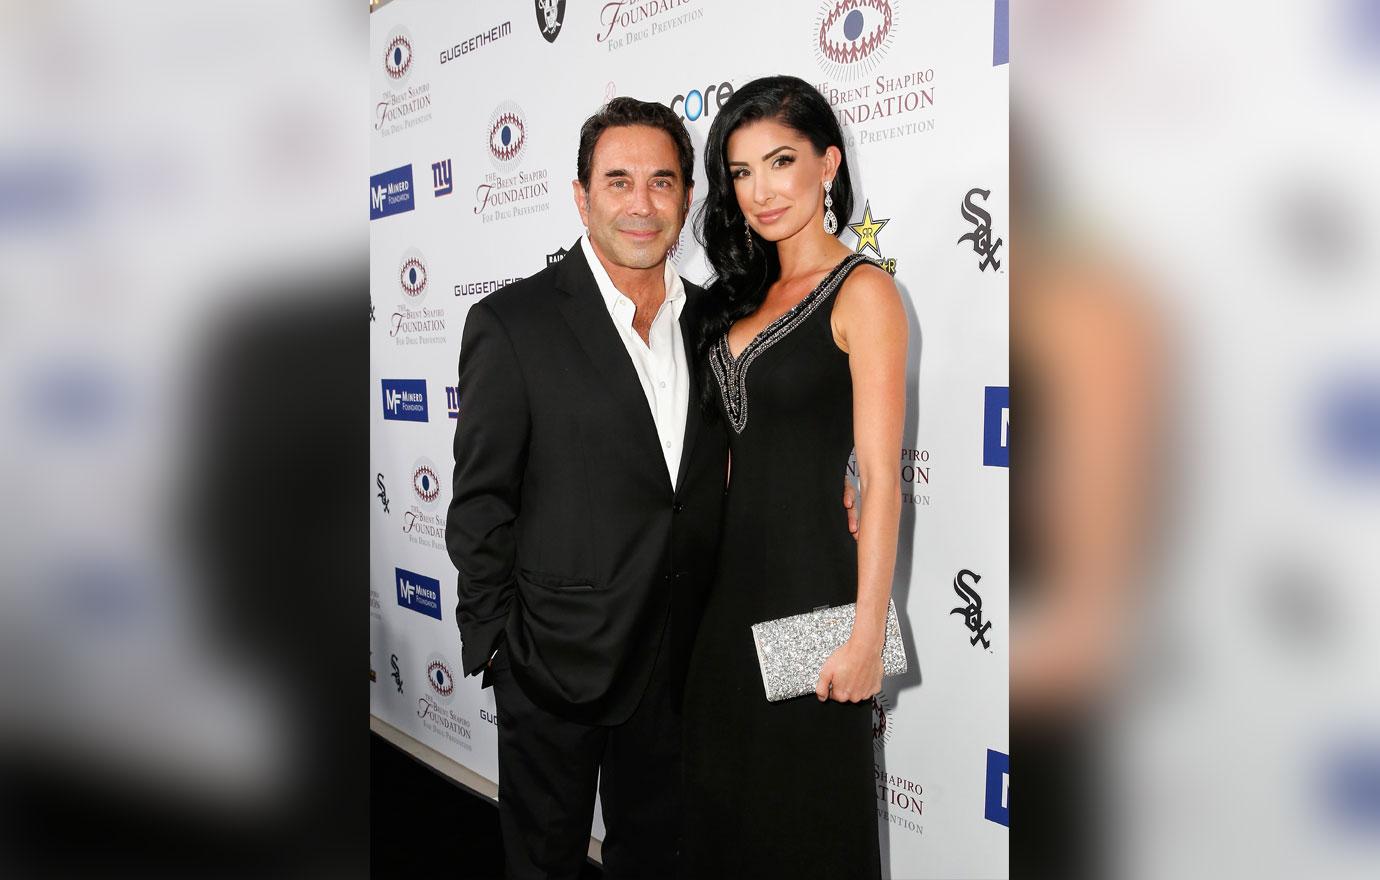 Botched' star Dr. Paul Nassif gets engaged